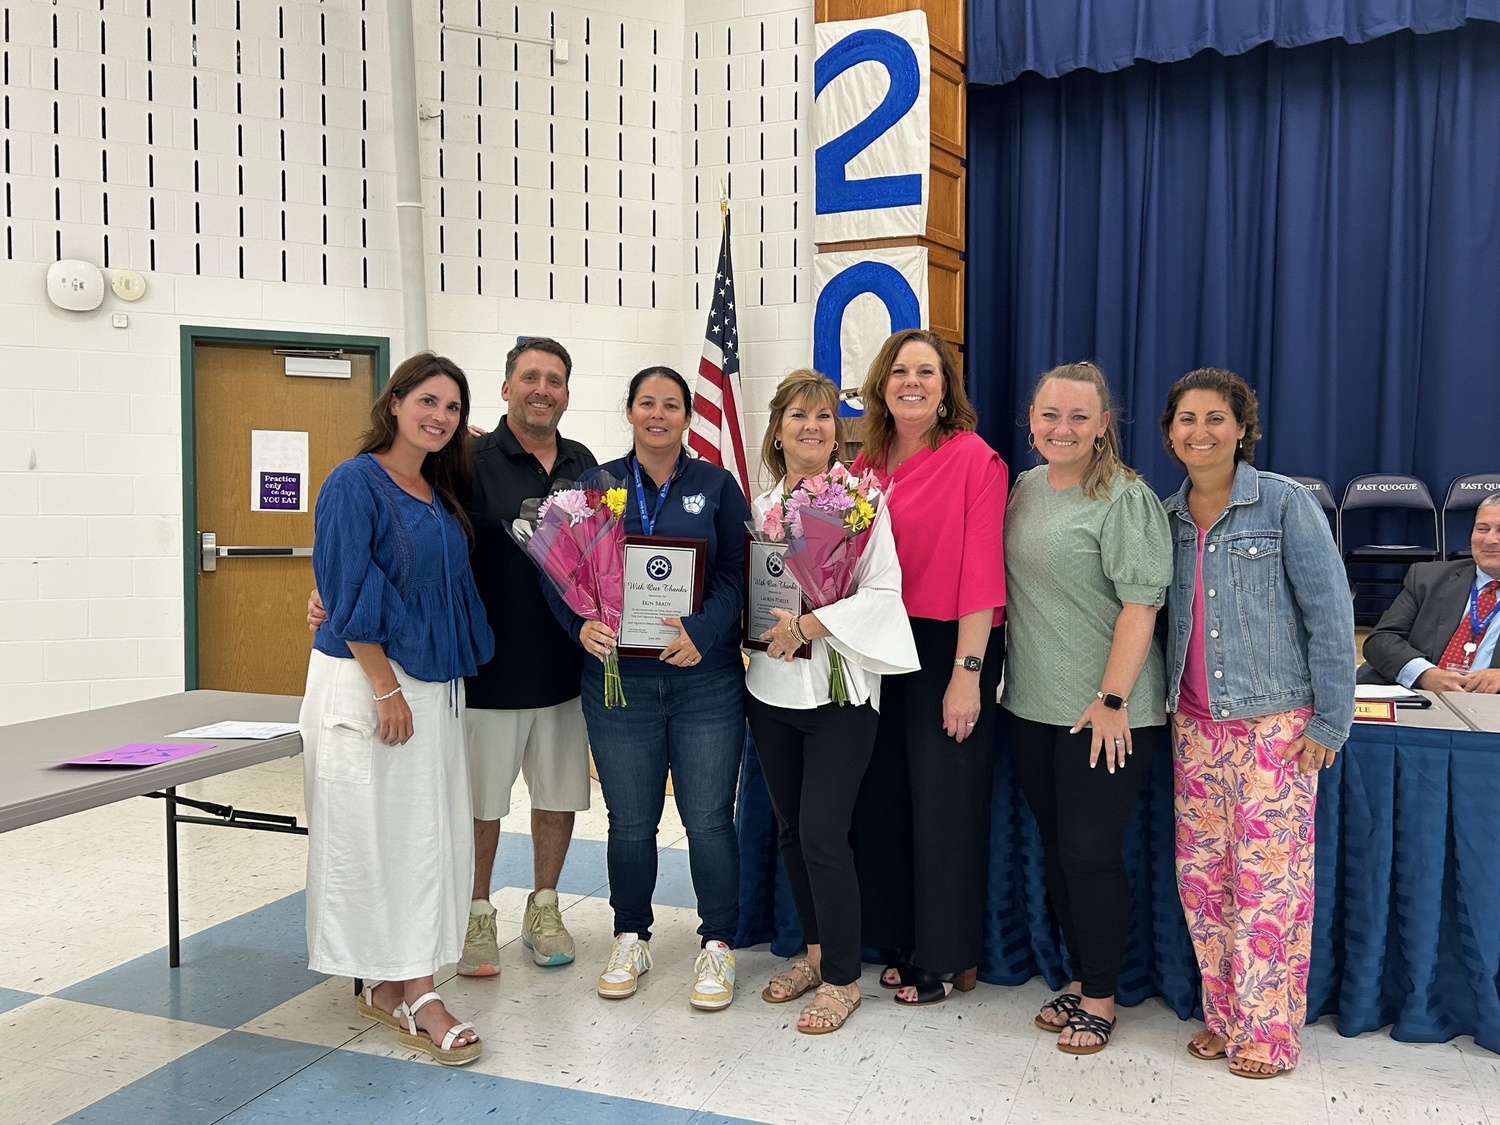 Paige Bonner, center, was granted tenure during the June 17 East Quogue Board of Education meeting. She is surrounded by family and members of the Board of Education.  COURTESY EAST QUOQUE SCHOOL DISTRICT